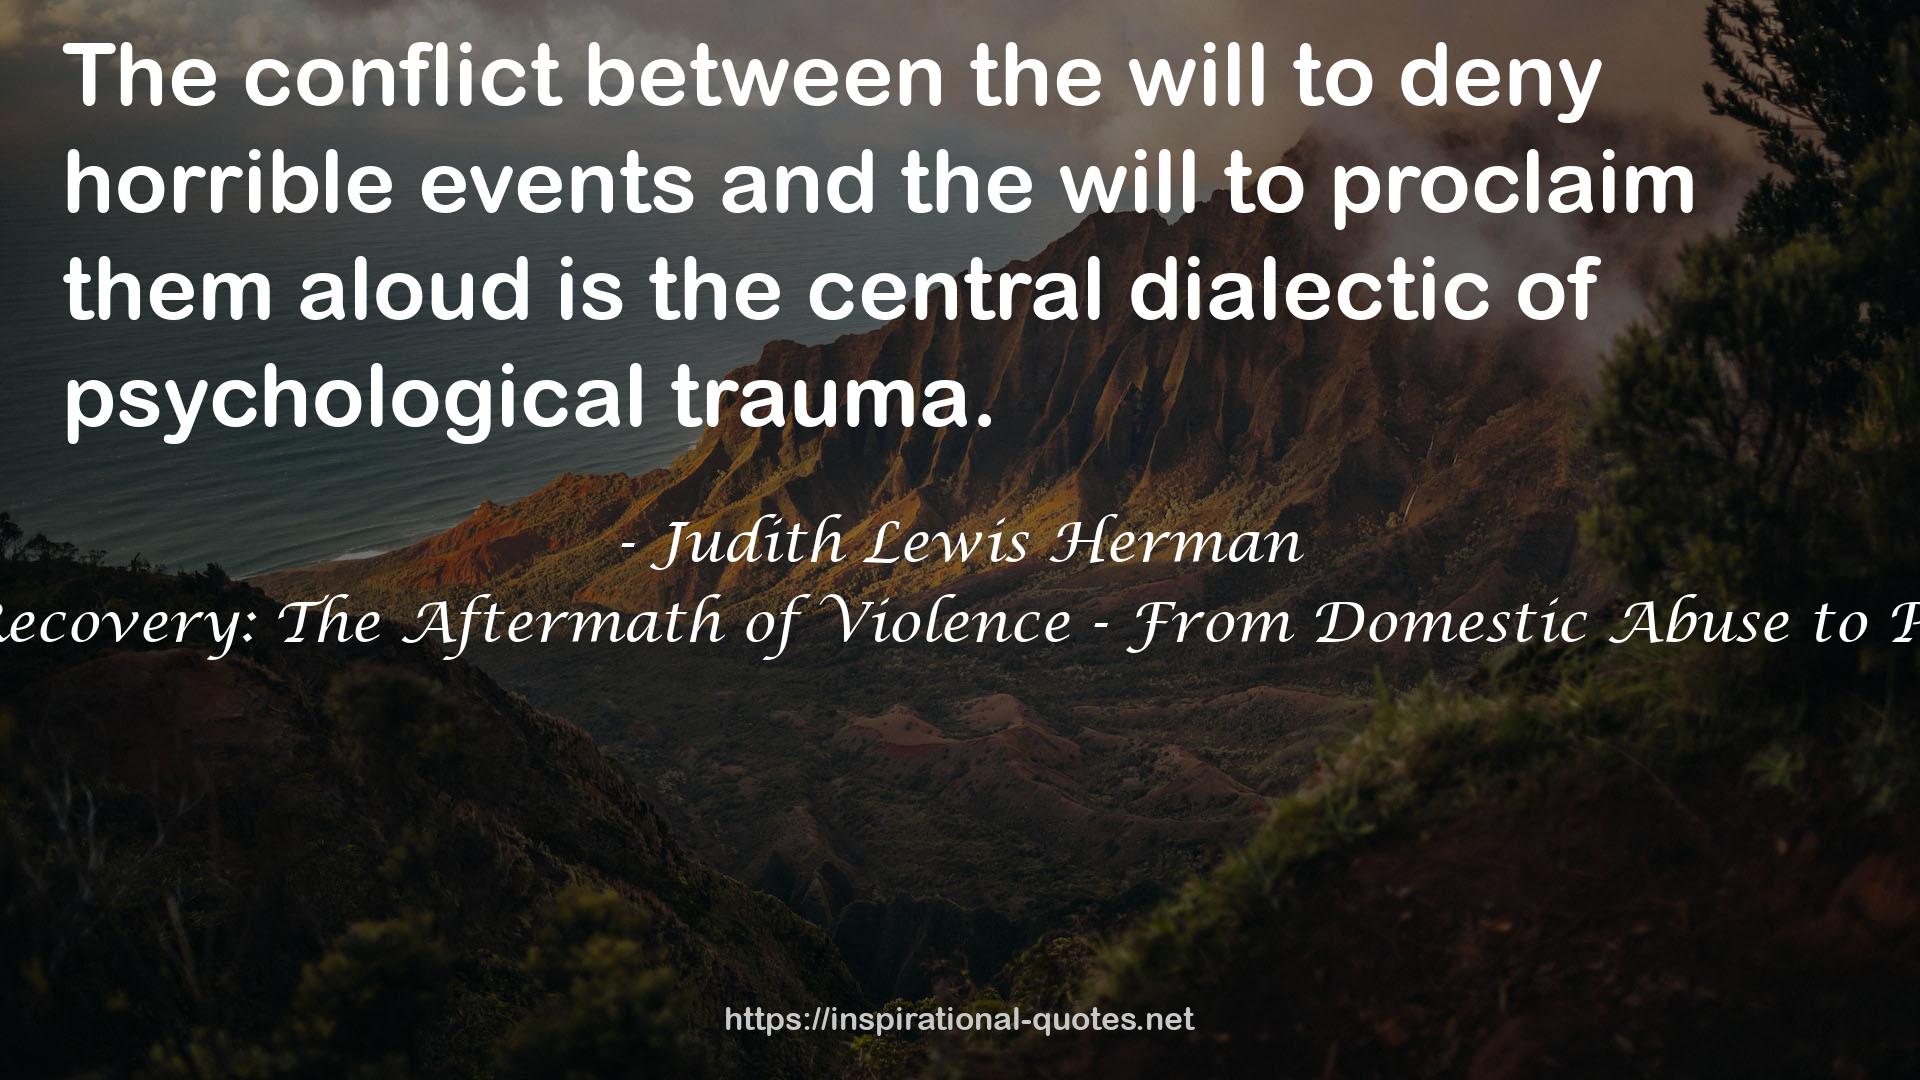 Trauma and Recovery: The Aftermath of Violence - From Domestic Abuse to Political Terror QUOTES